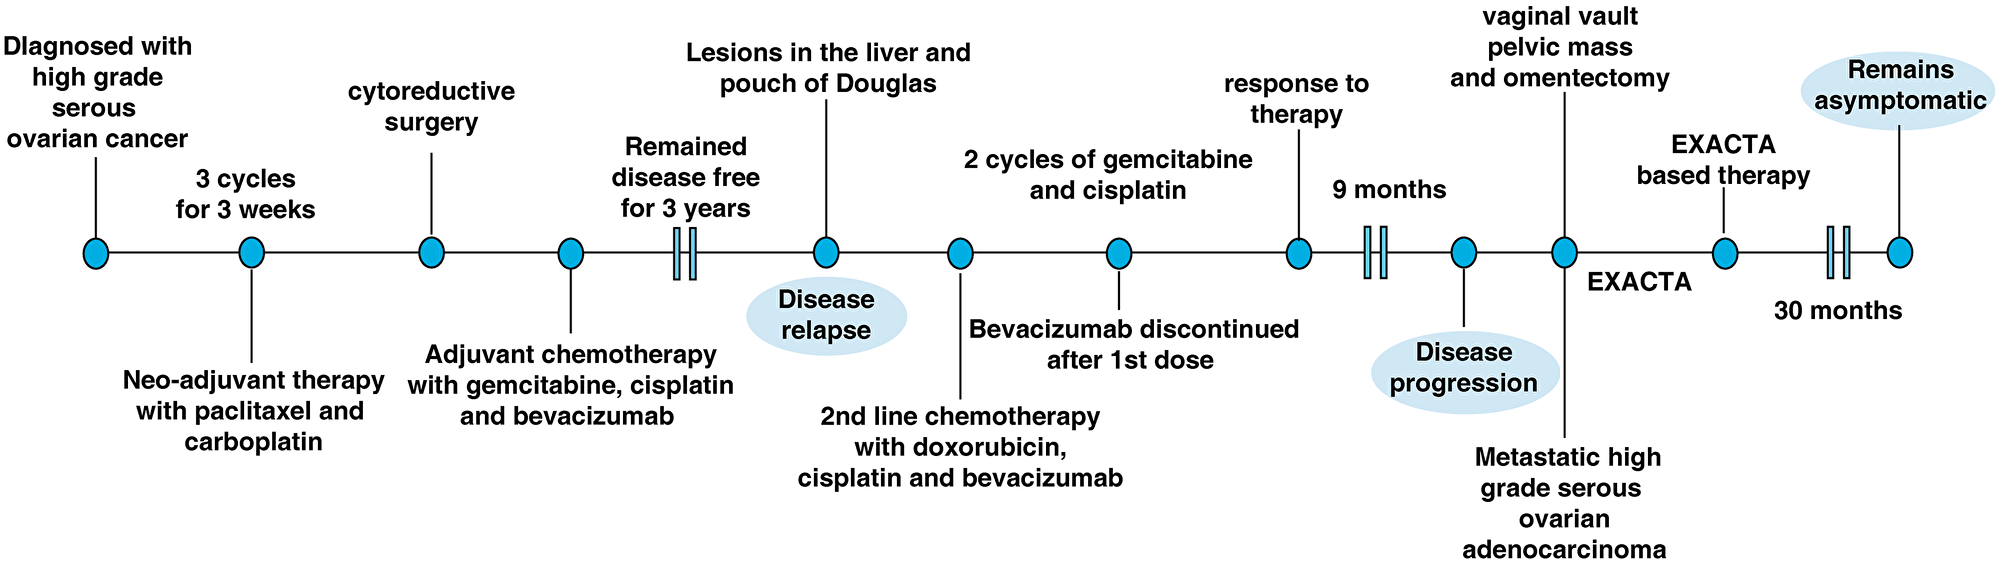 The clinical time line of the 57-year old female presented with high-grade serous ovarian cancer.